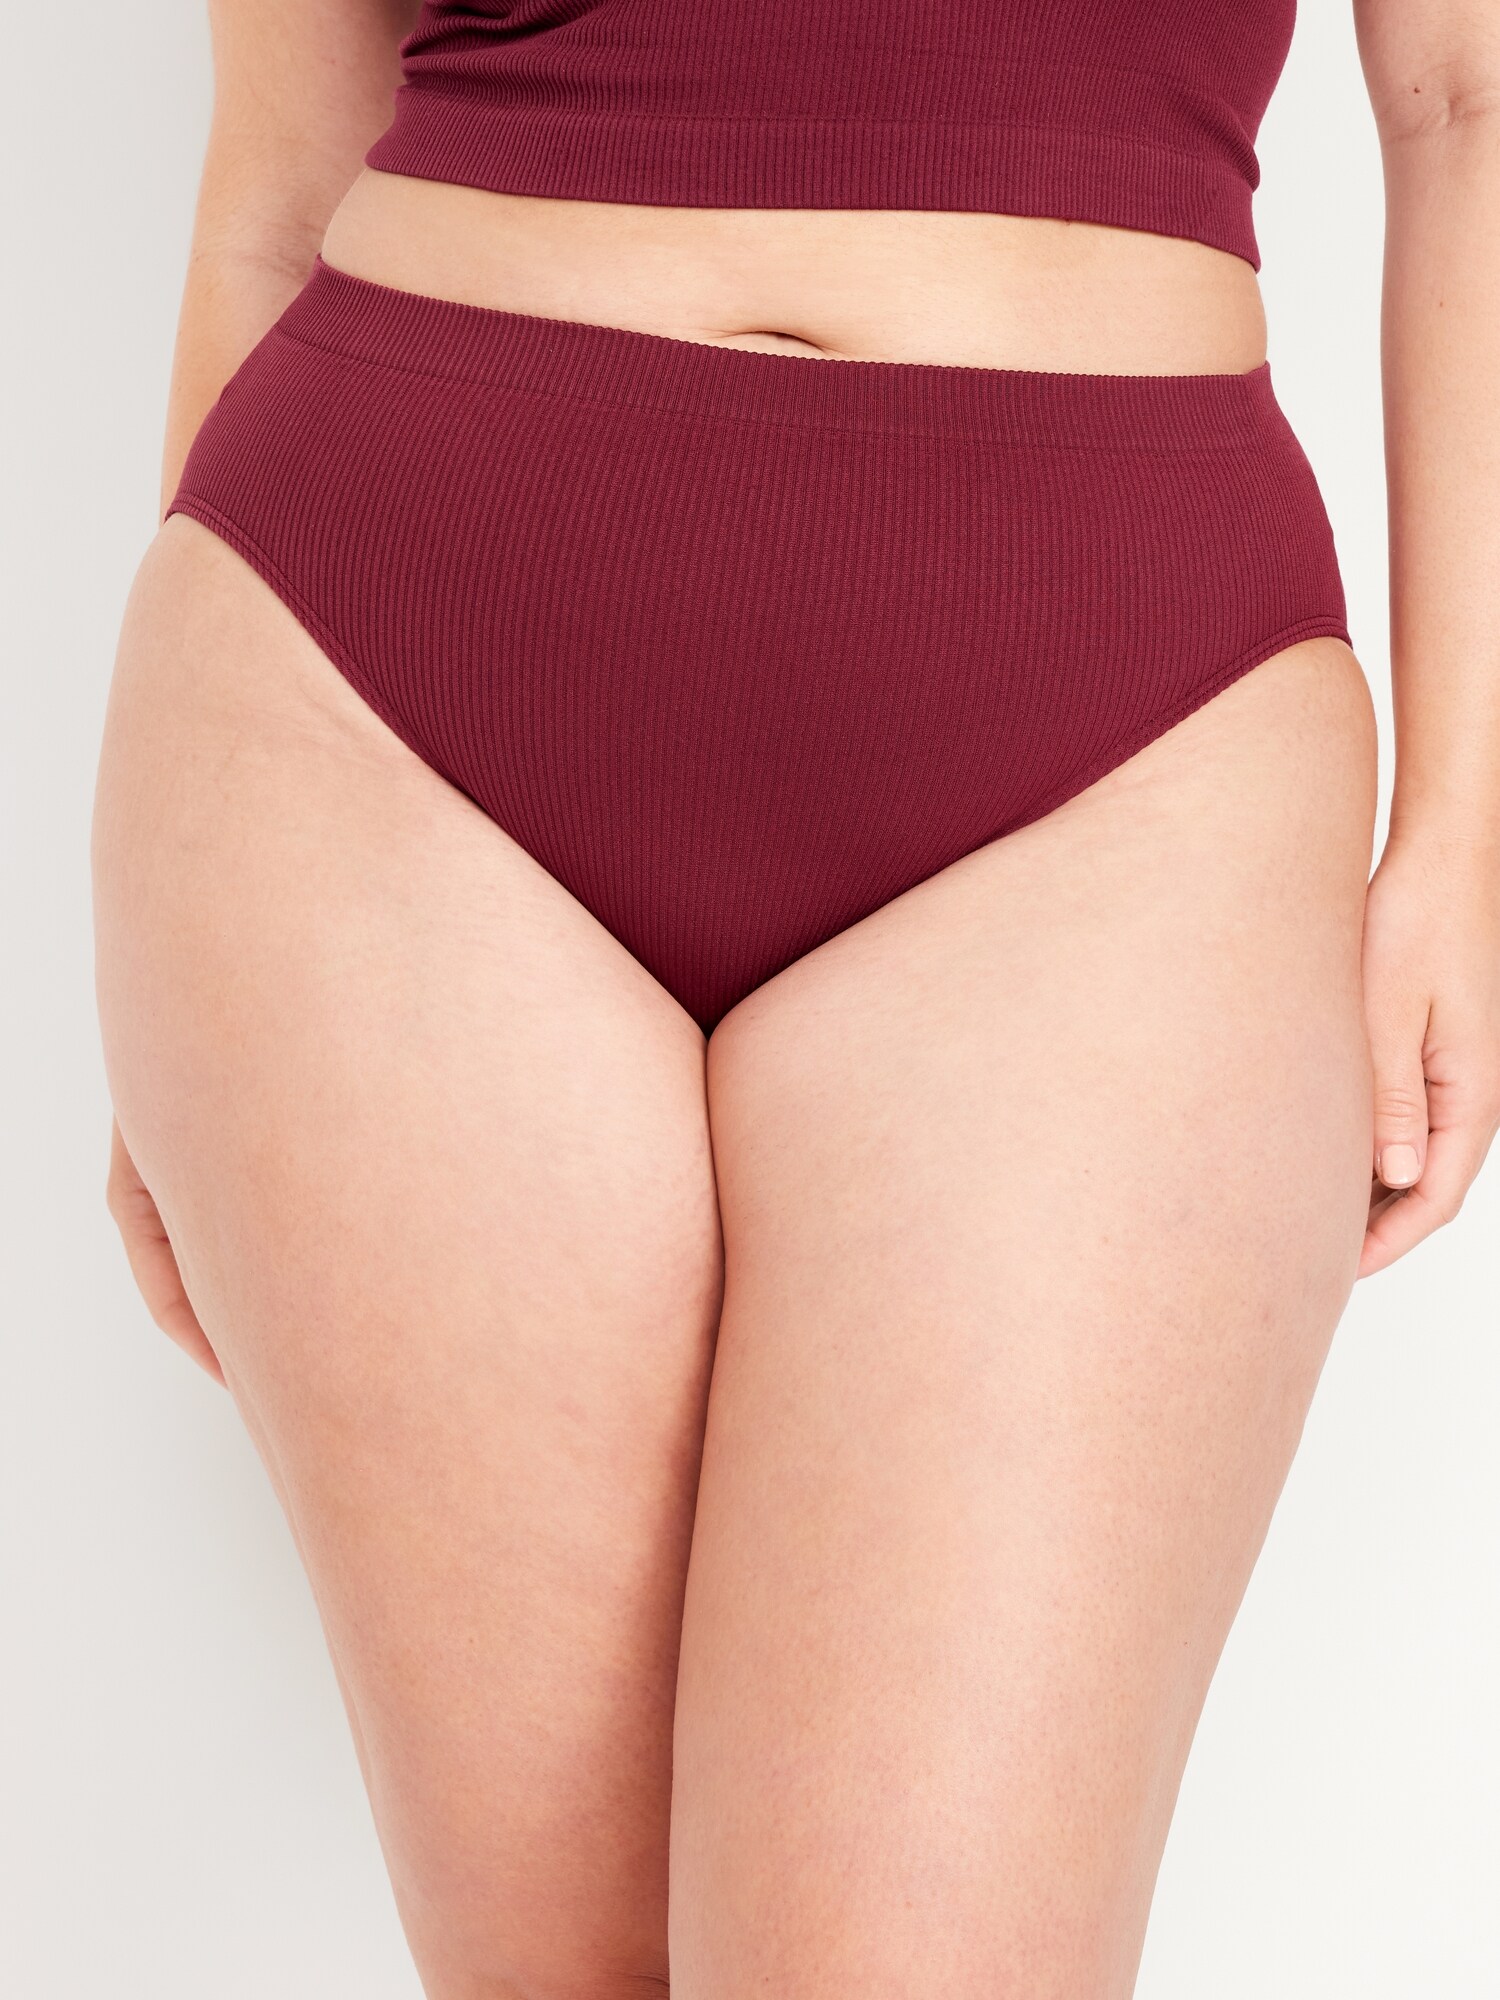 Bridgete High Waist Full Coverage/plus Size Panties/vintage Coverage/bamboo  Underwear/full Coverage/high Waist/ French Cut/ Lingerie 